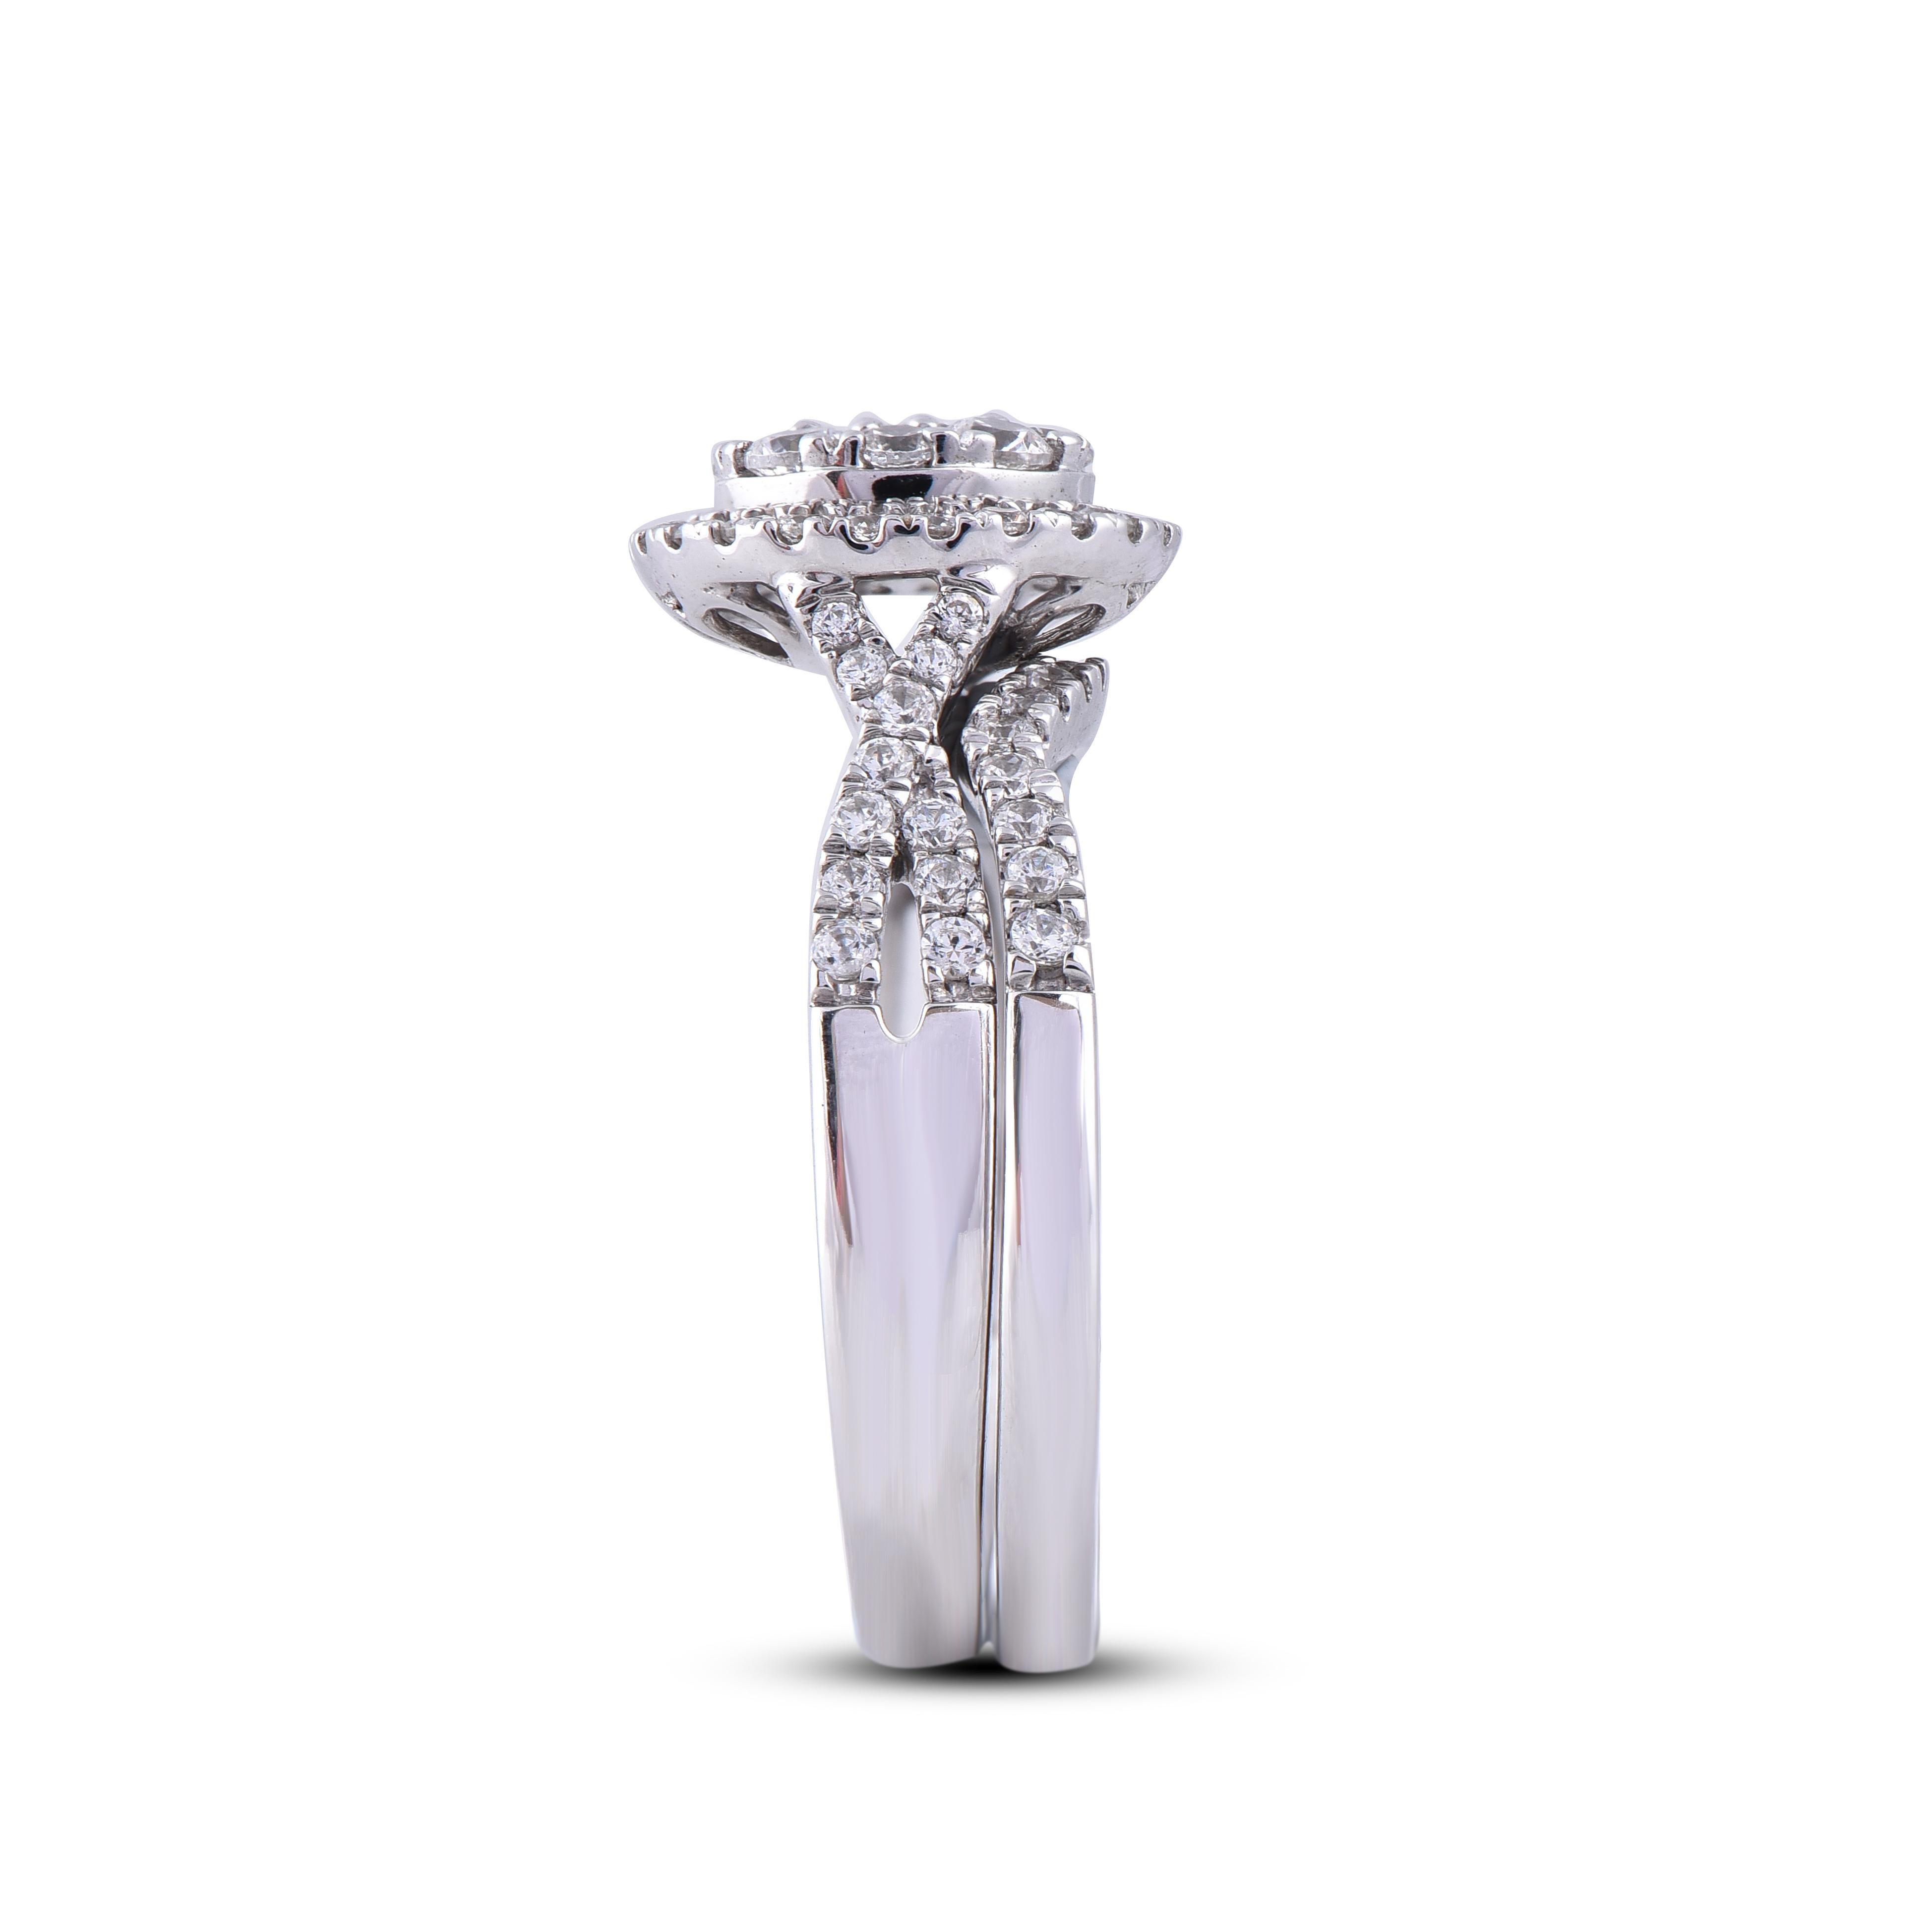 TJD 1.00 Carat Round Diamond 14 Karat White Gold Engagement Ring Bridal Set In New Condition For Sale In New York, NY